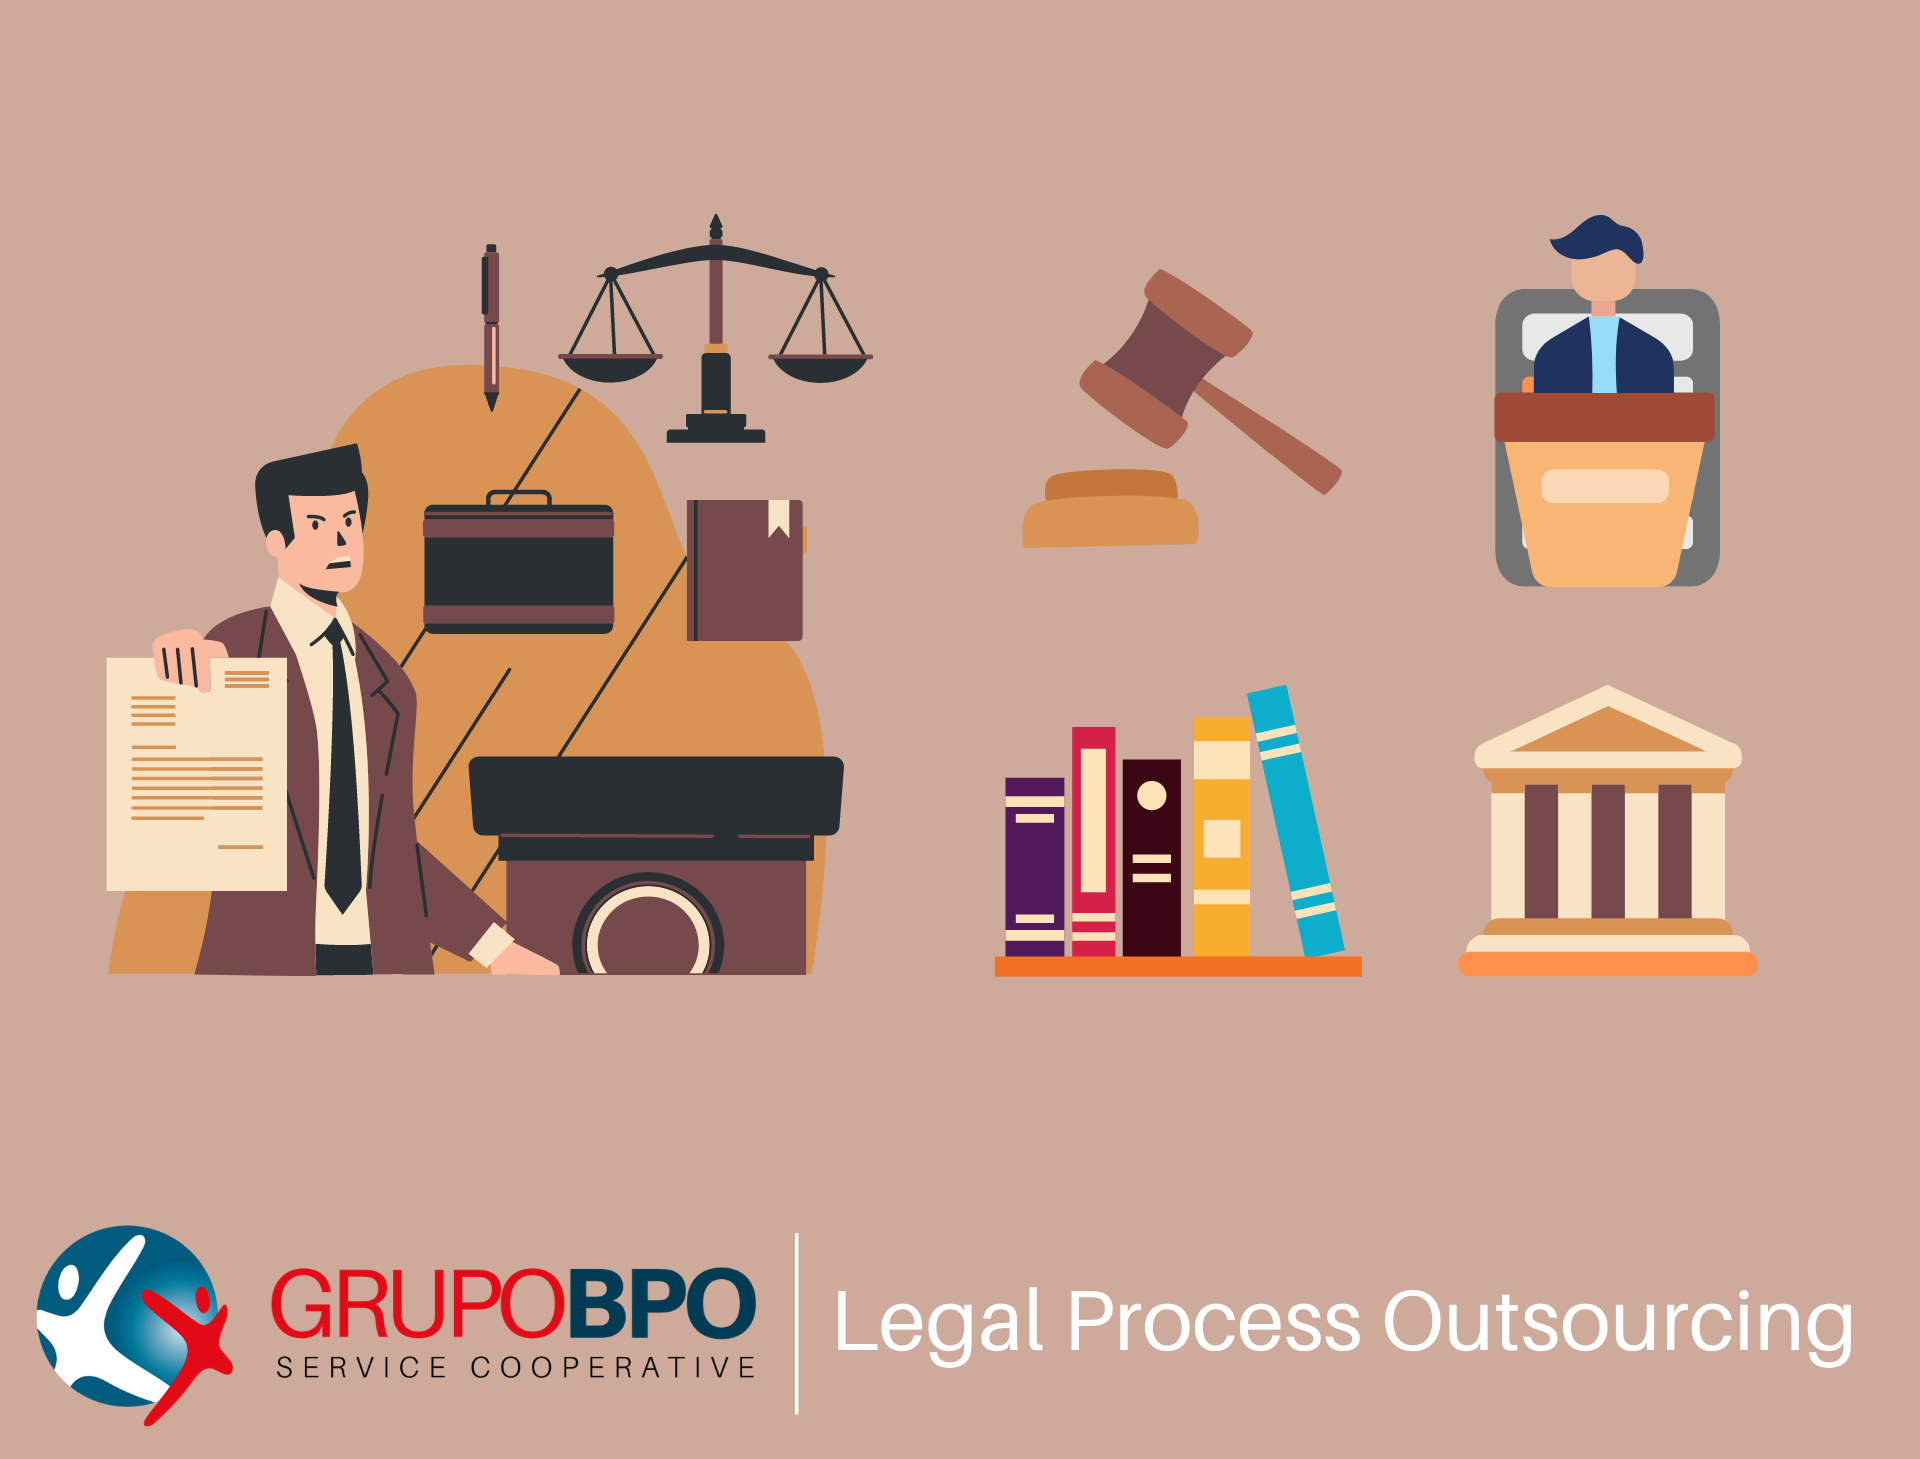 Advantages of Legal Process Outsourcing in the Philippines